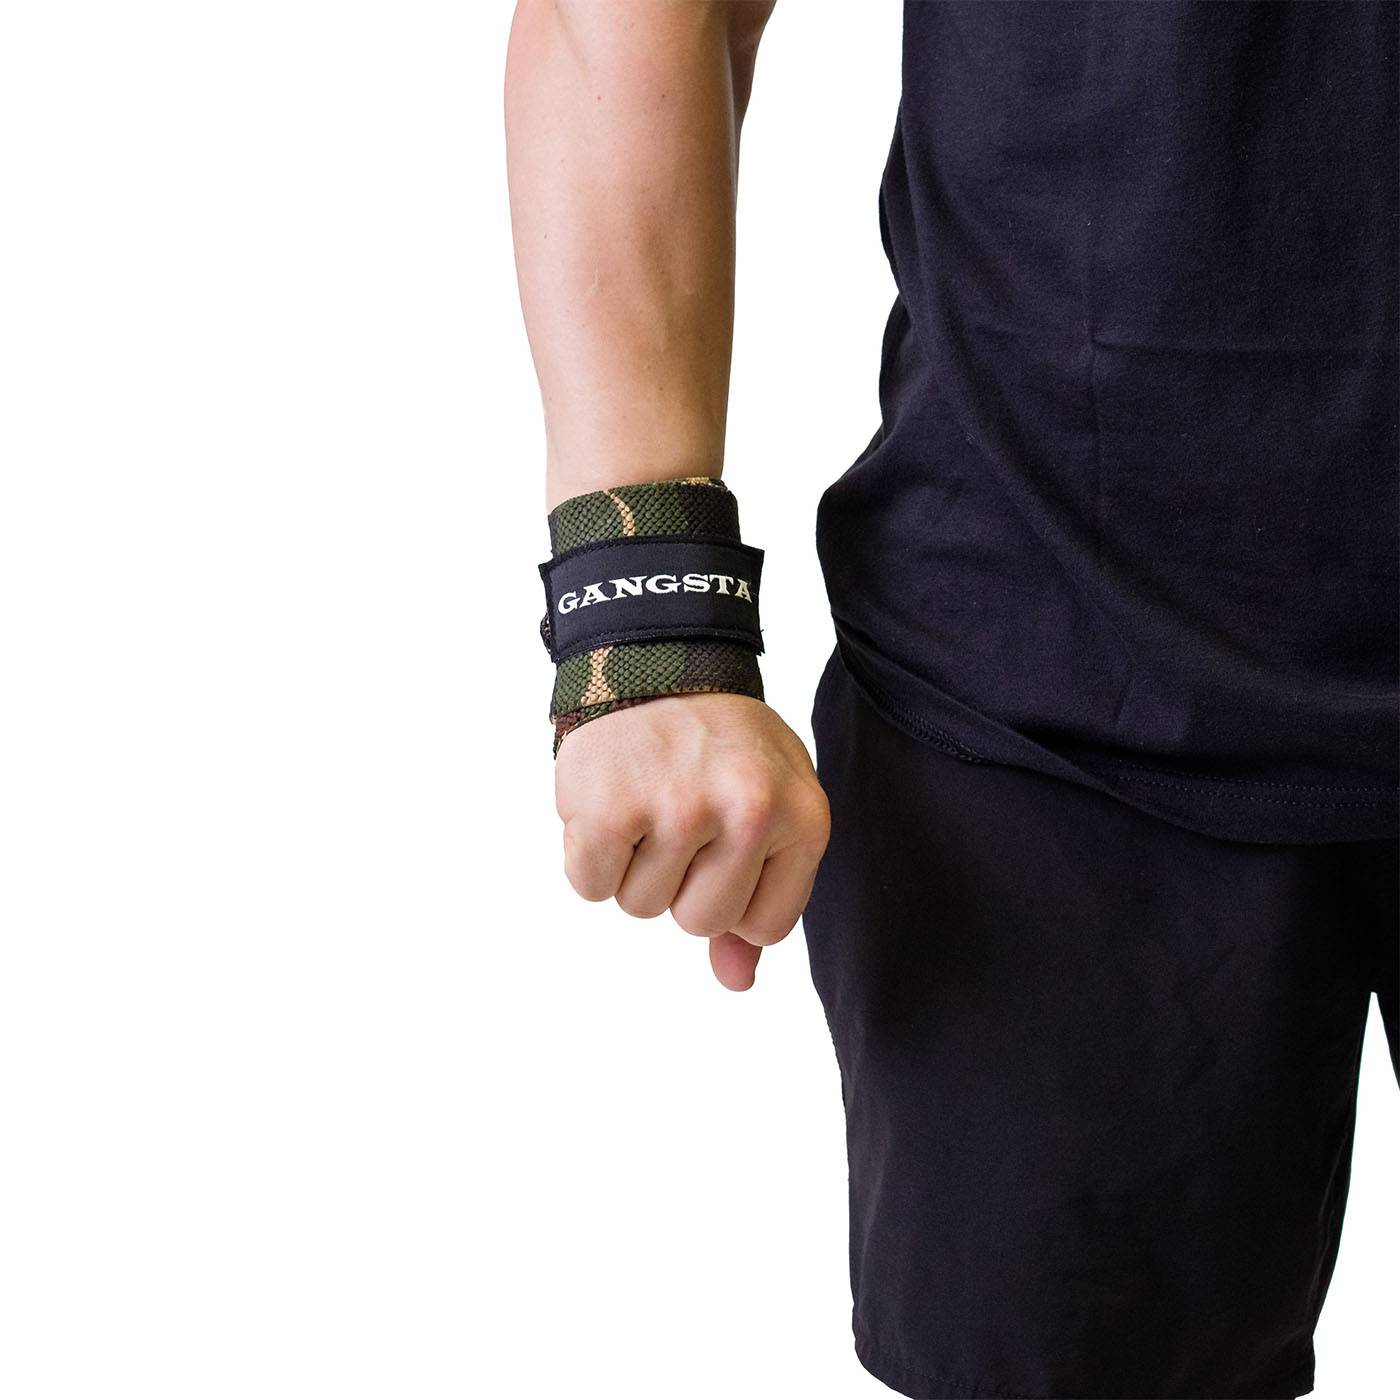 Sling Shot | Gangsta Wraps - XTC Fitness - Exercise Equipment Superstore - Canada - Wrist Wraps